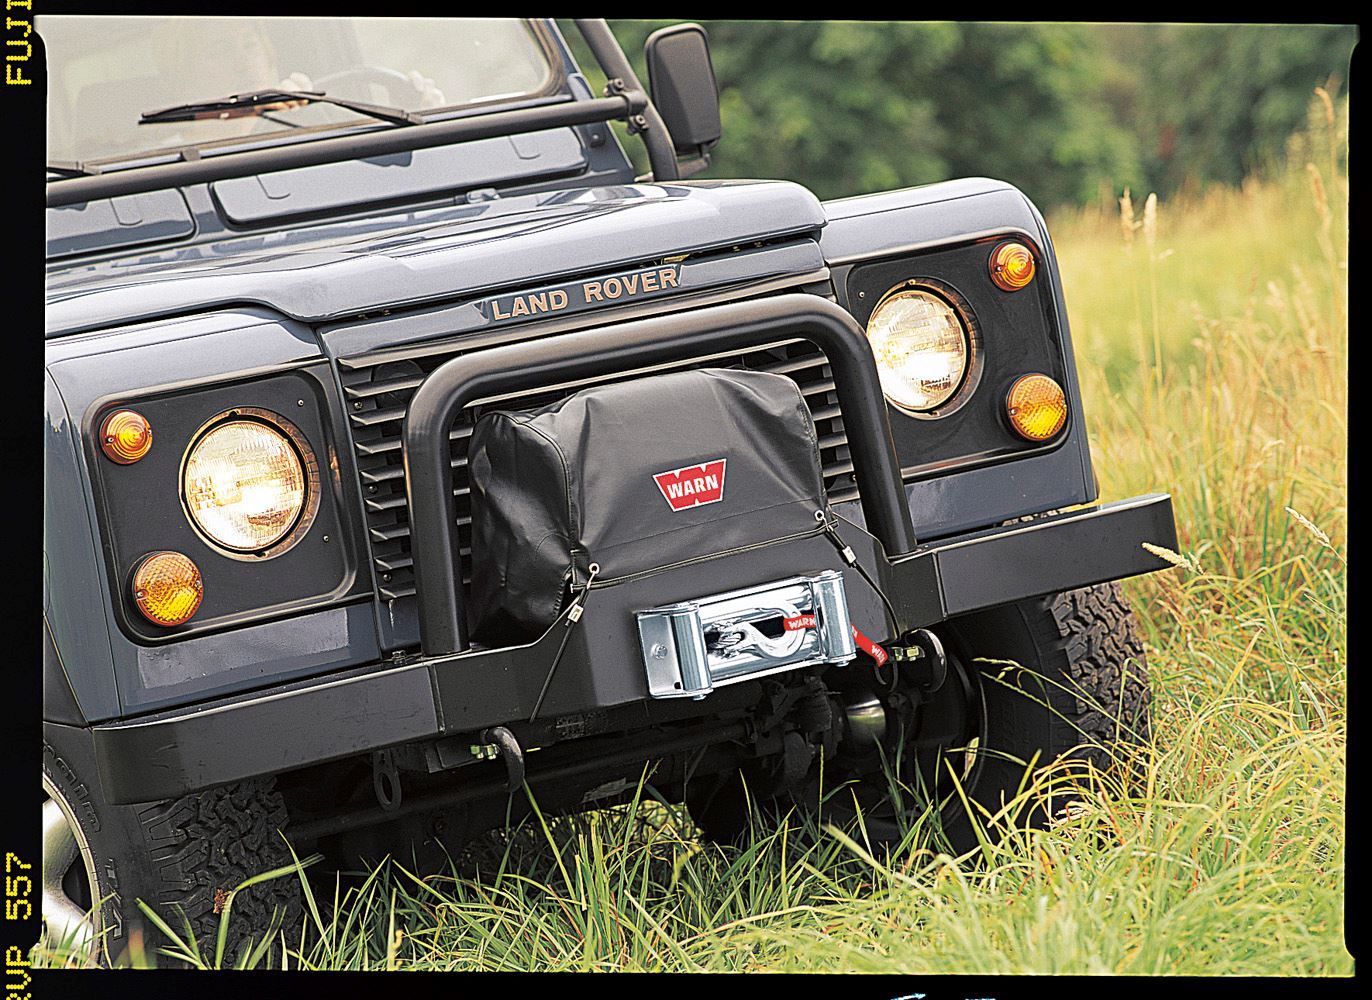 WARN Soft Winch Cover for M8274-50 Winch